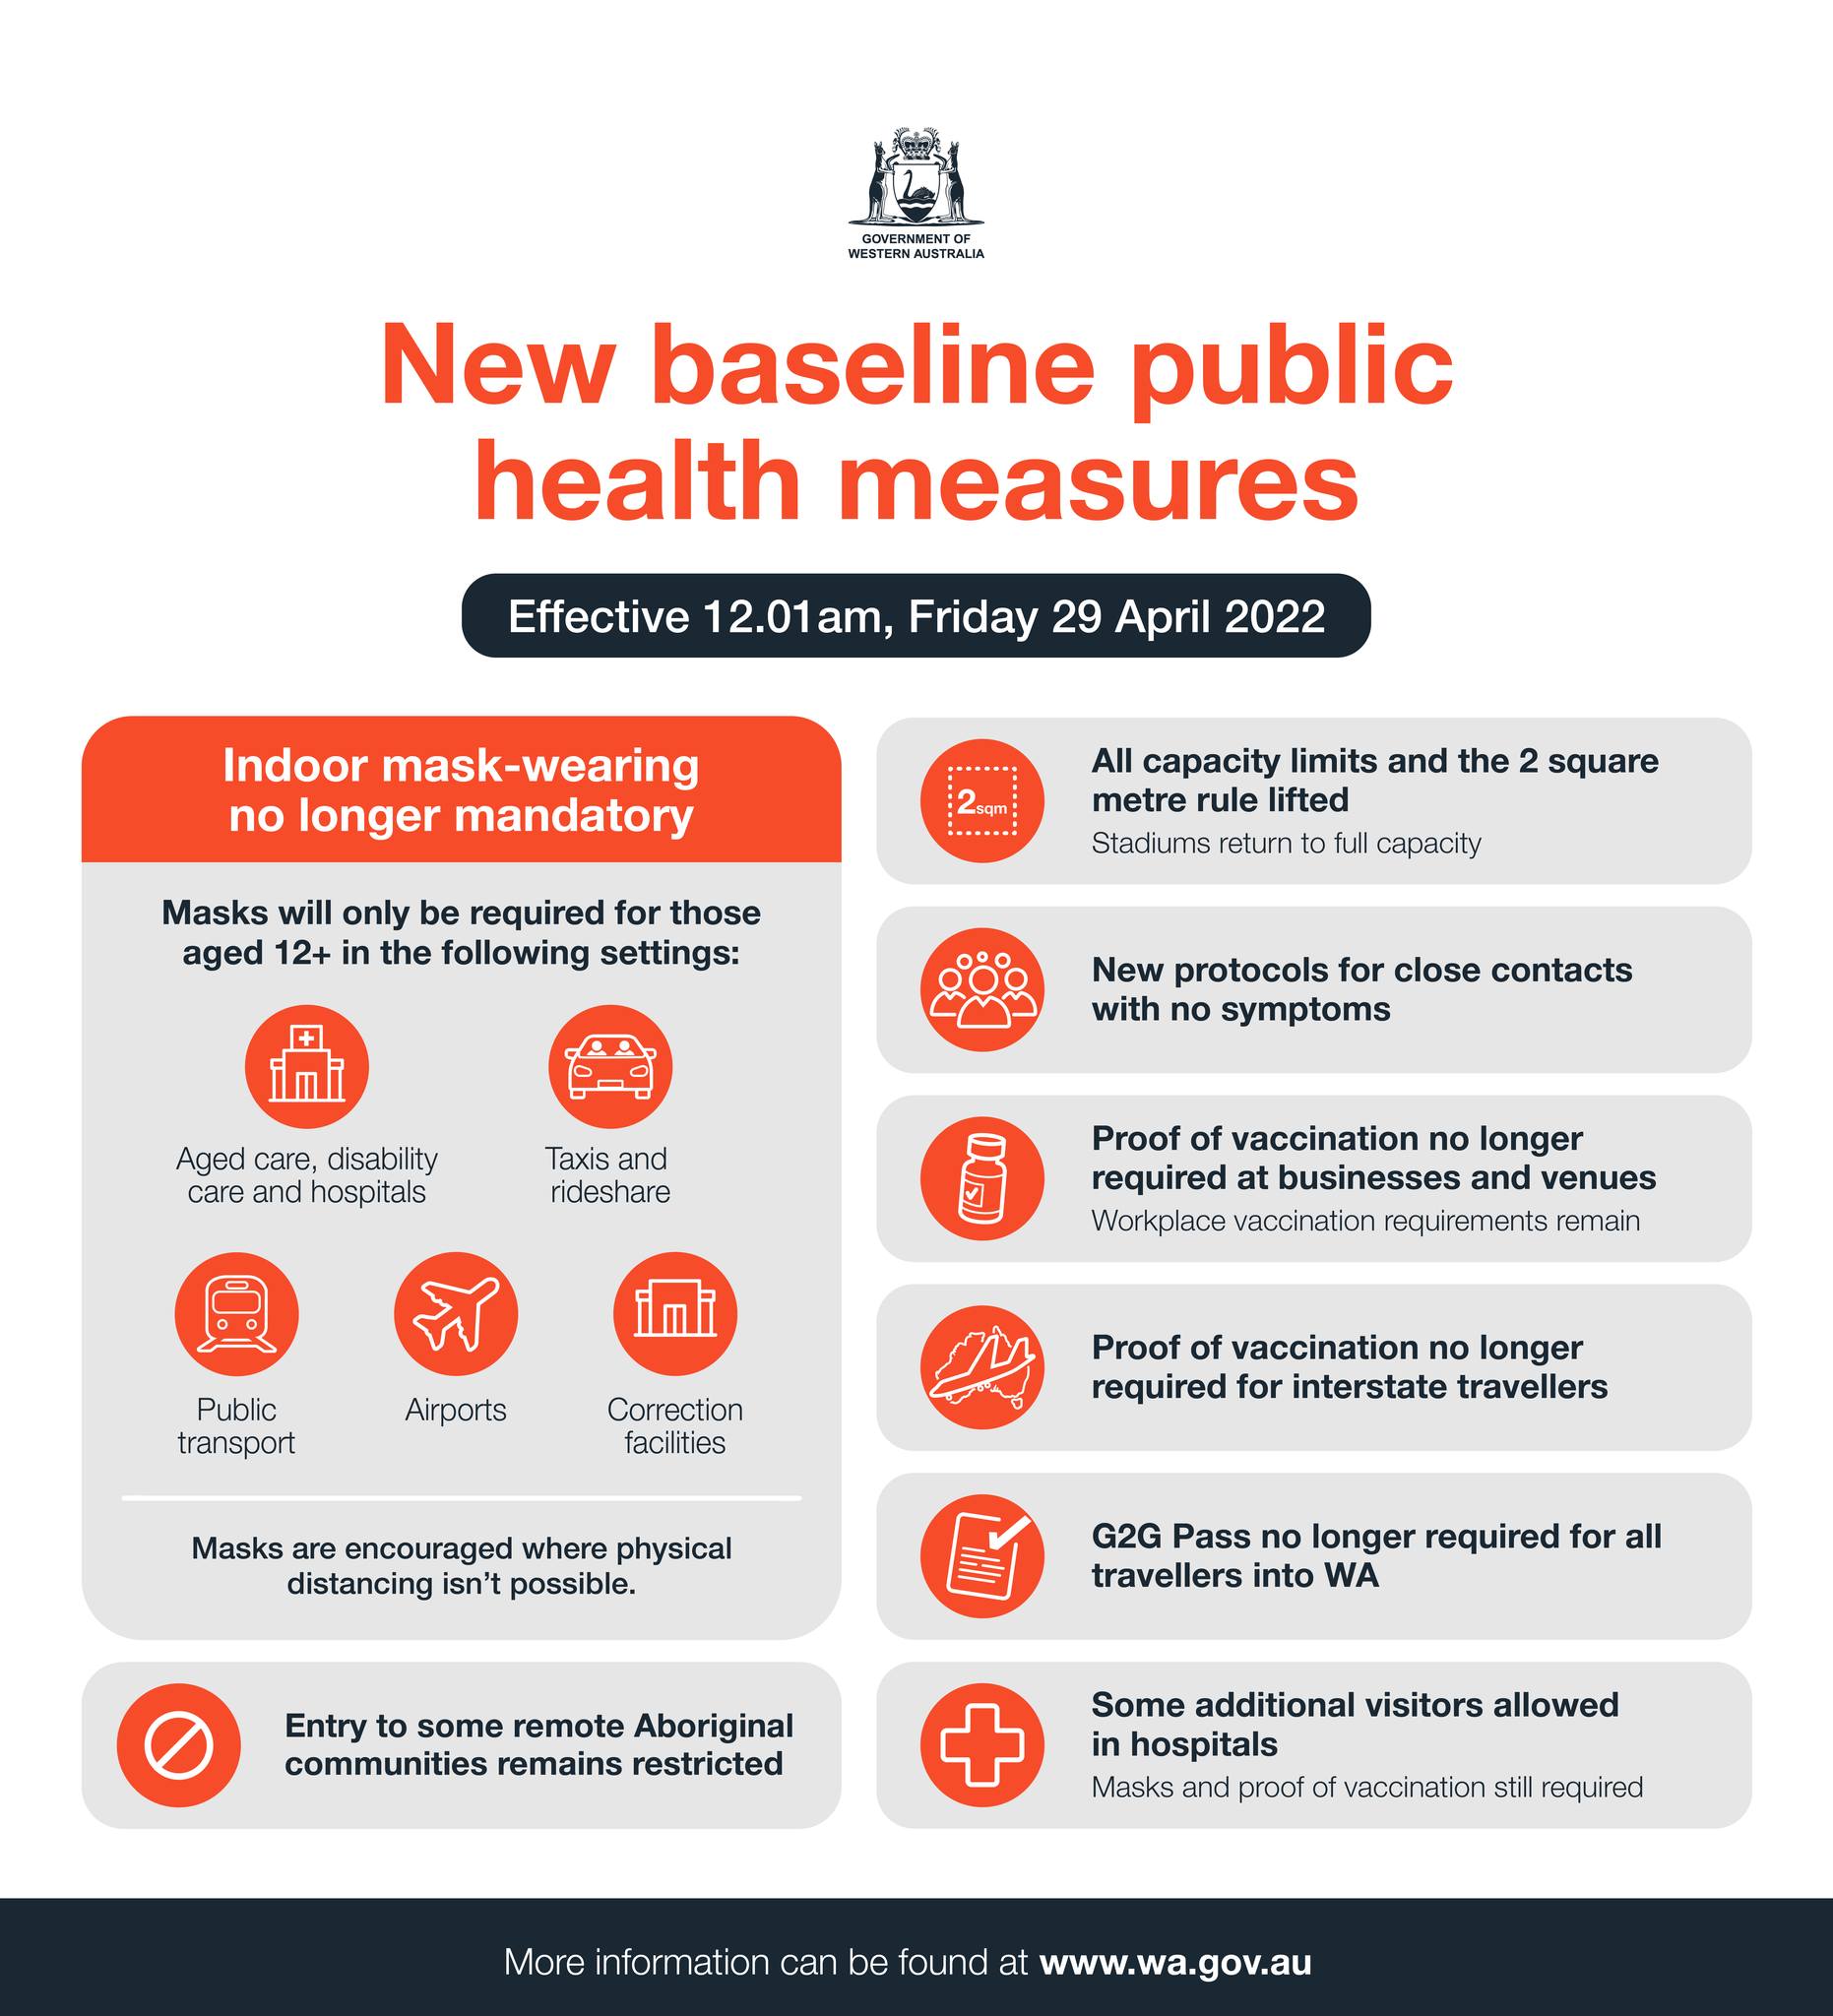 Baseline public health measures in effect from Friday the 29th of April